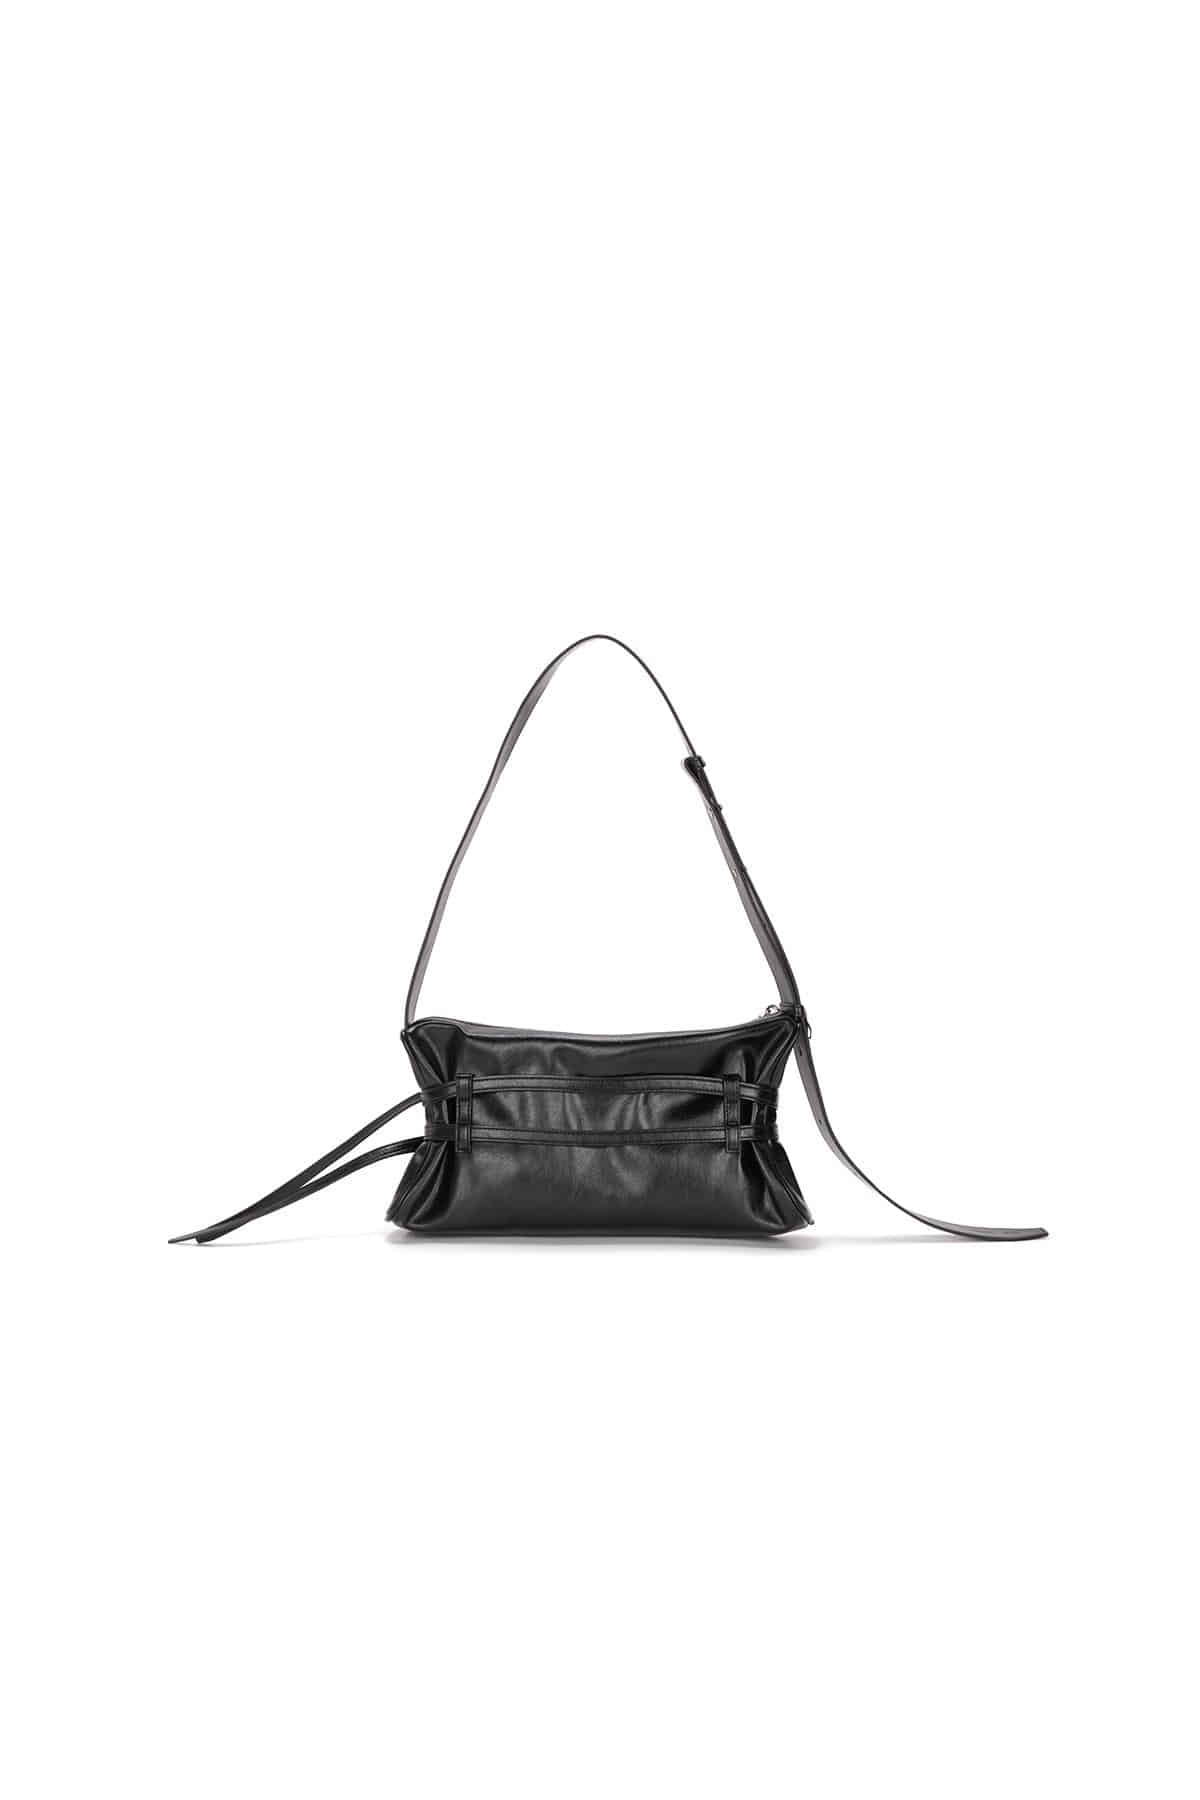 DOUBLE BELTED STRAP MINI BAG IN BLACK